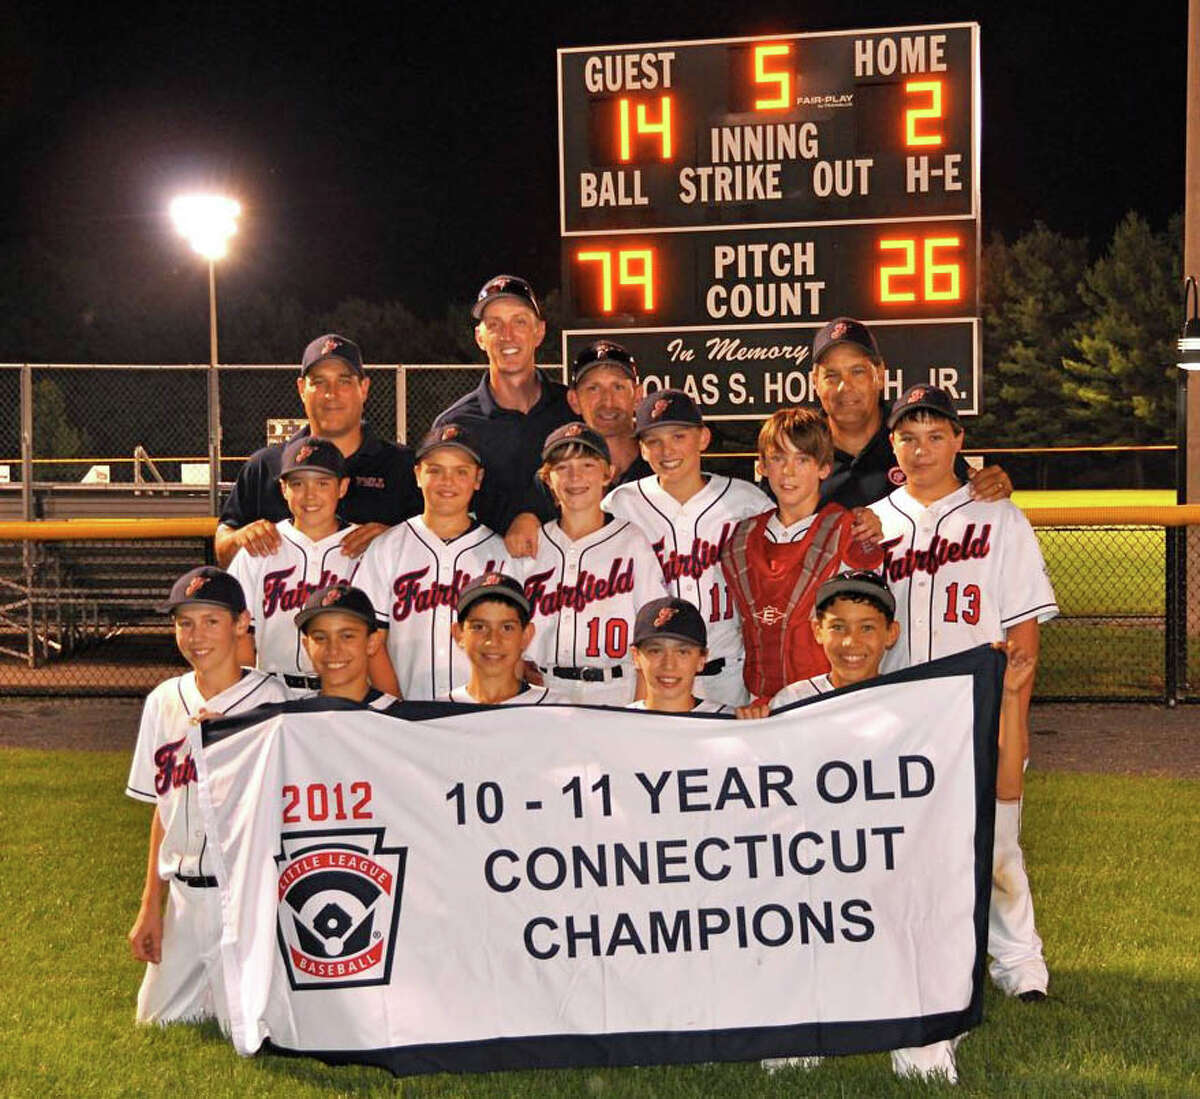 The Fairfield National Little League 11-year-old team won the state championship with a 2-0 sweep of Coginchaug, capped with a 14-2 win on Monday night. The team, pictured, front row from left, is Owen Polley, Daniel Fallacaro, Stephen Paolini, Sammy Klein, Christopher Bogan; middle row: C. J. Palmieri, Sam Vincent, Connor Curley, Alexy Linsenmeyer, Gabe Andrews, Mark Vinci; back row: Coach Phil Palmieri, coach Craig Curley, Manager Lenny Klein, coach Paul Vinci.